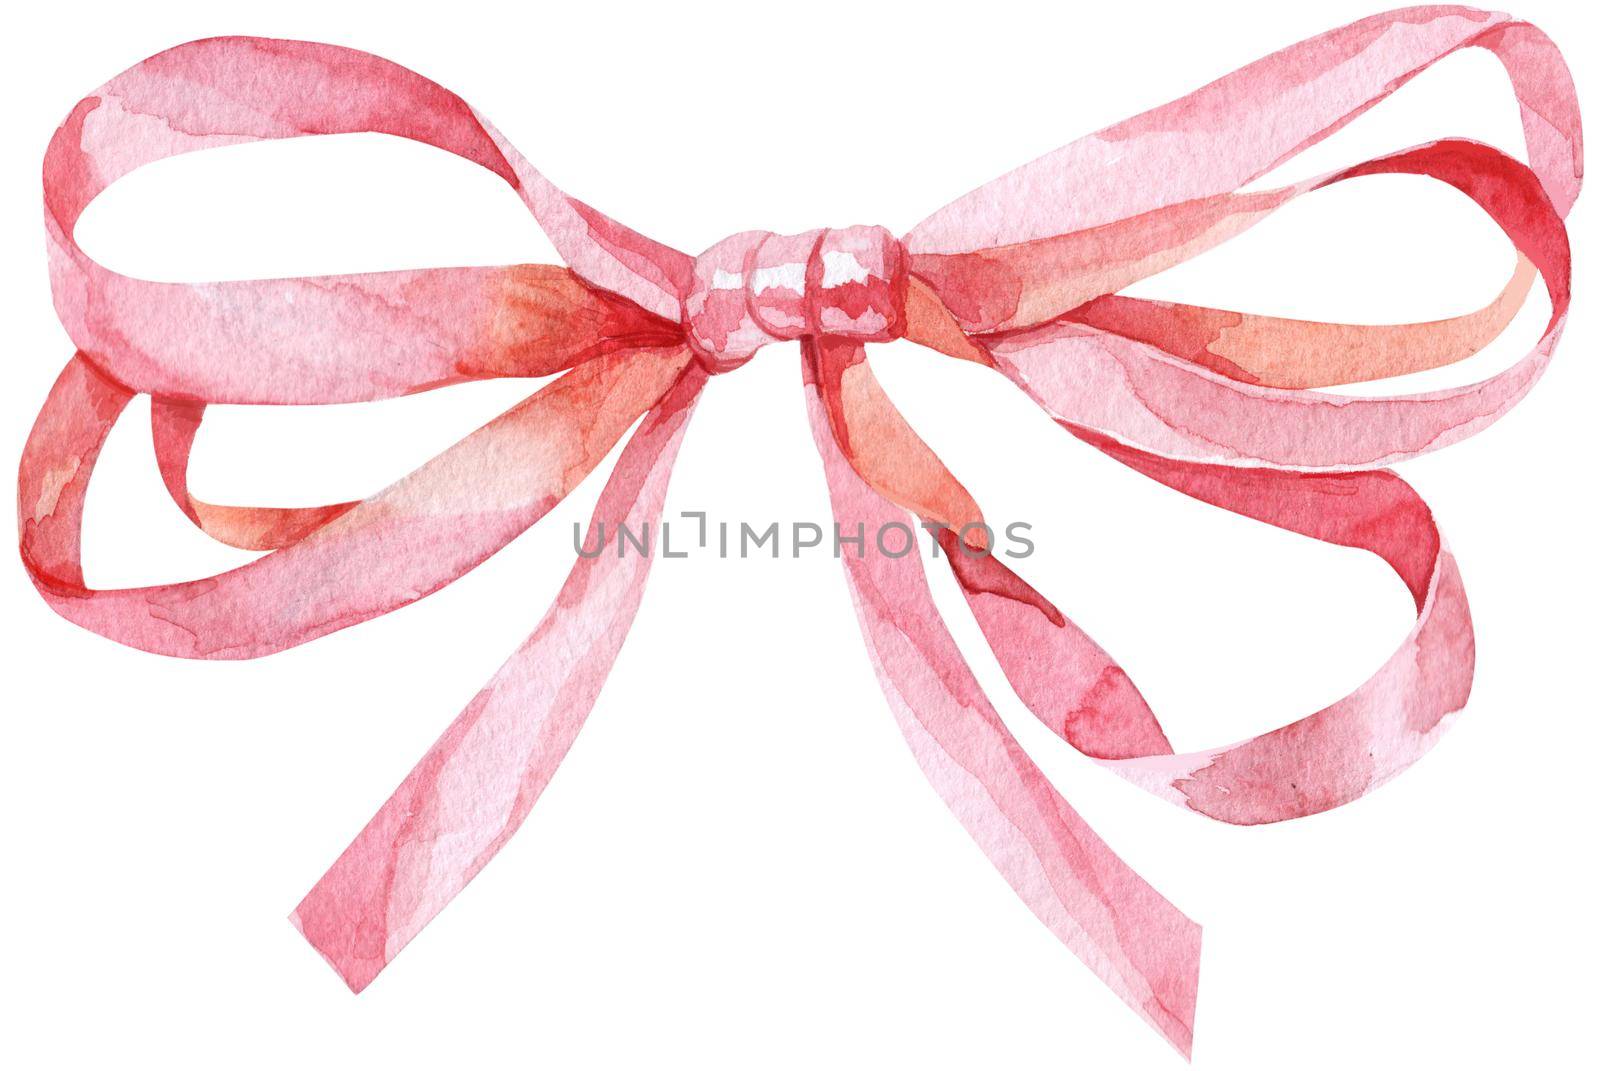 Watercolor pink bow. Hand painted gift bow isolated on white background. Party or greeting object